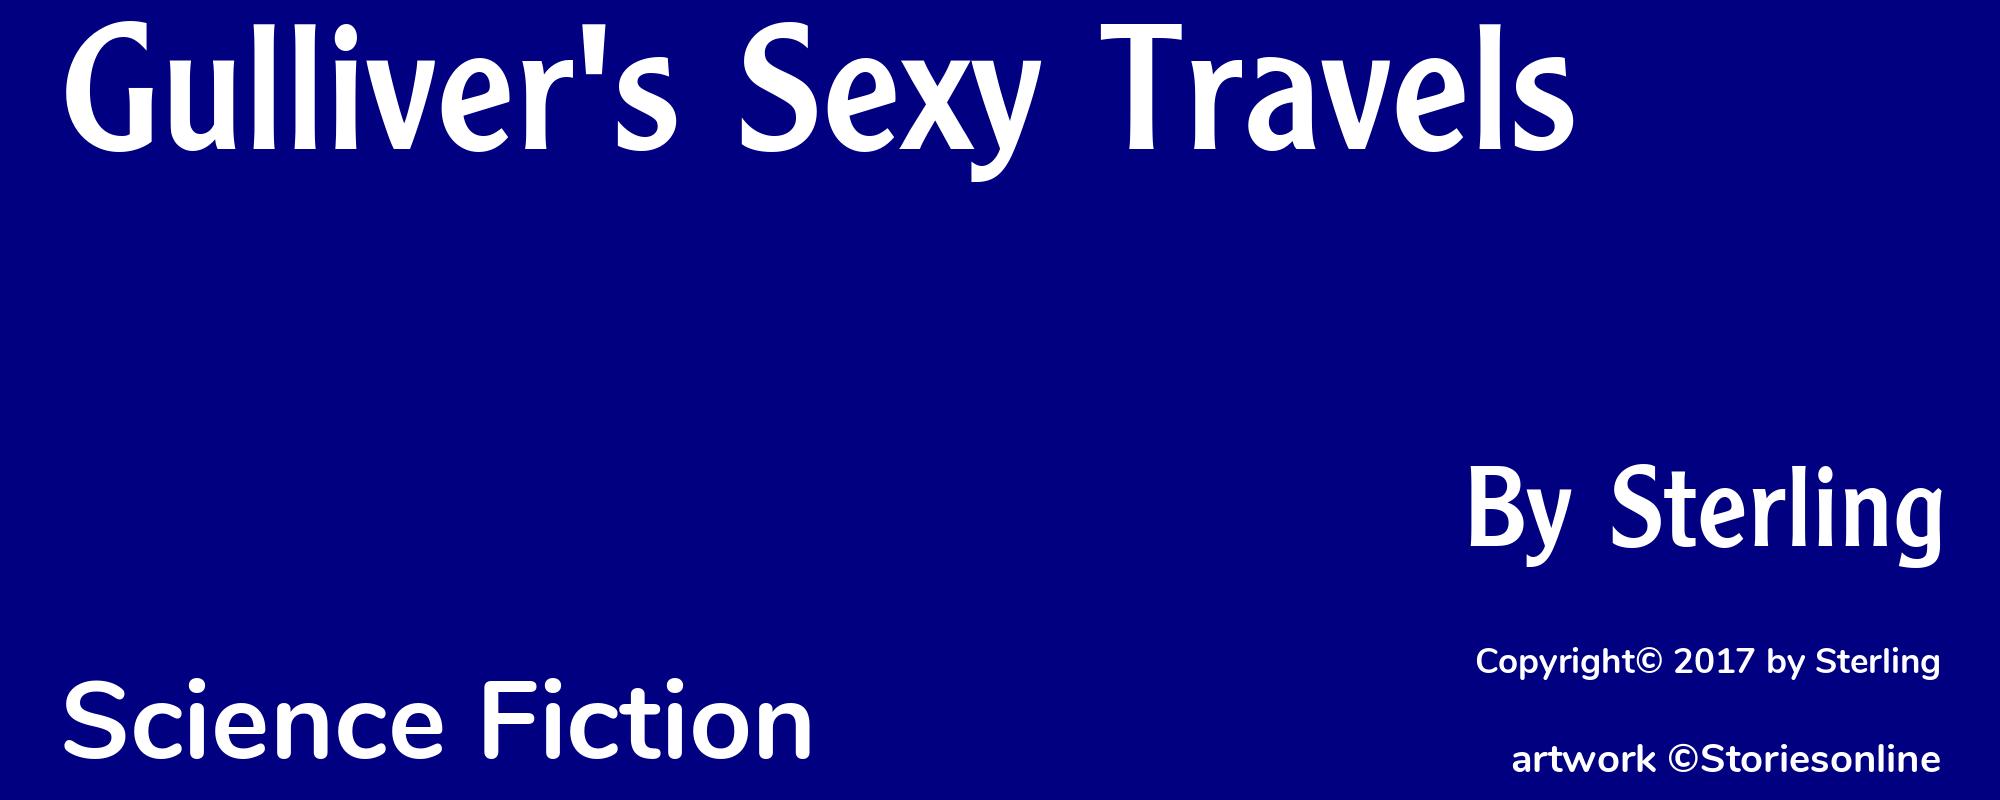 Gulliver's Sexy Travels - Cover